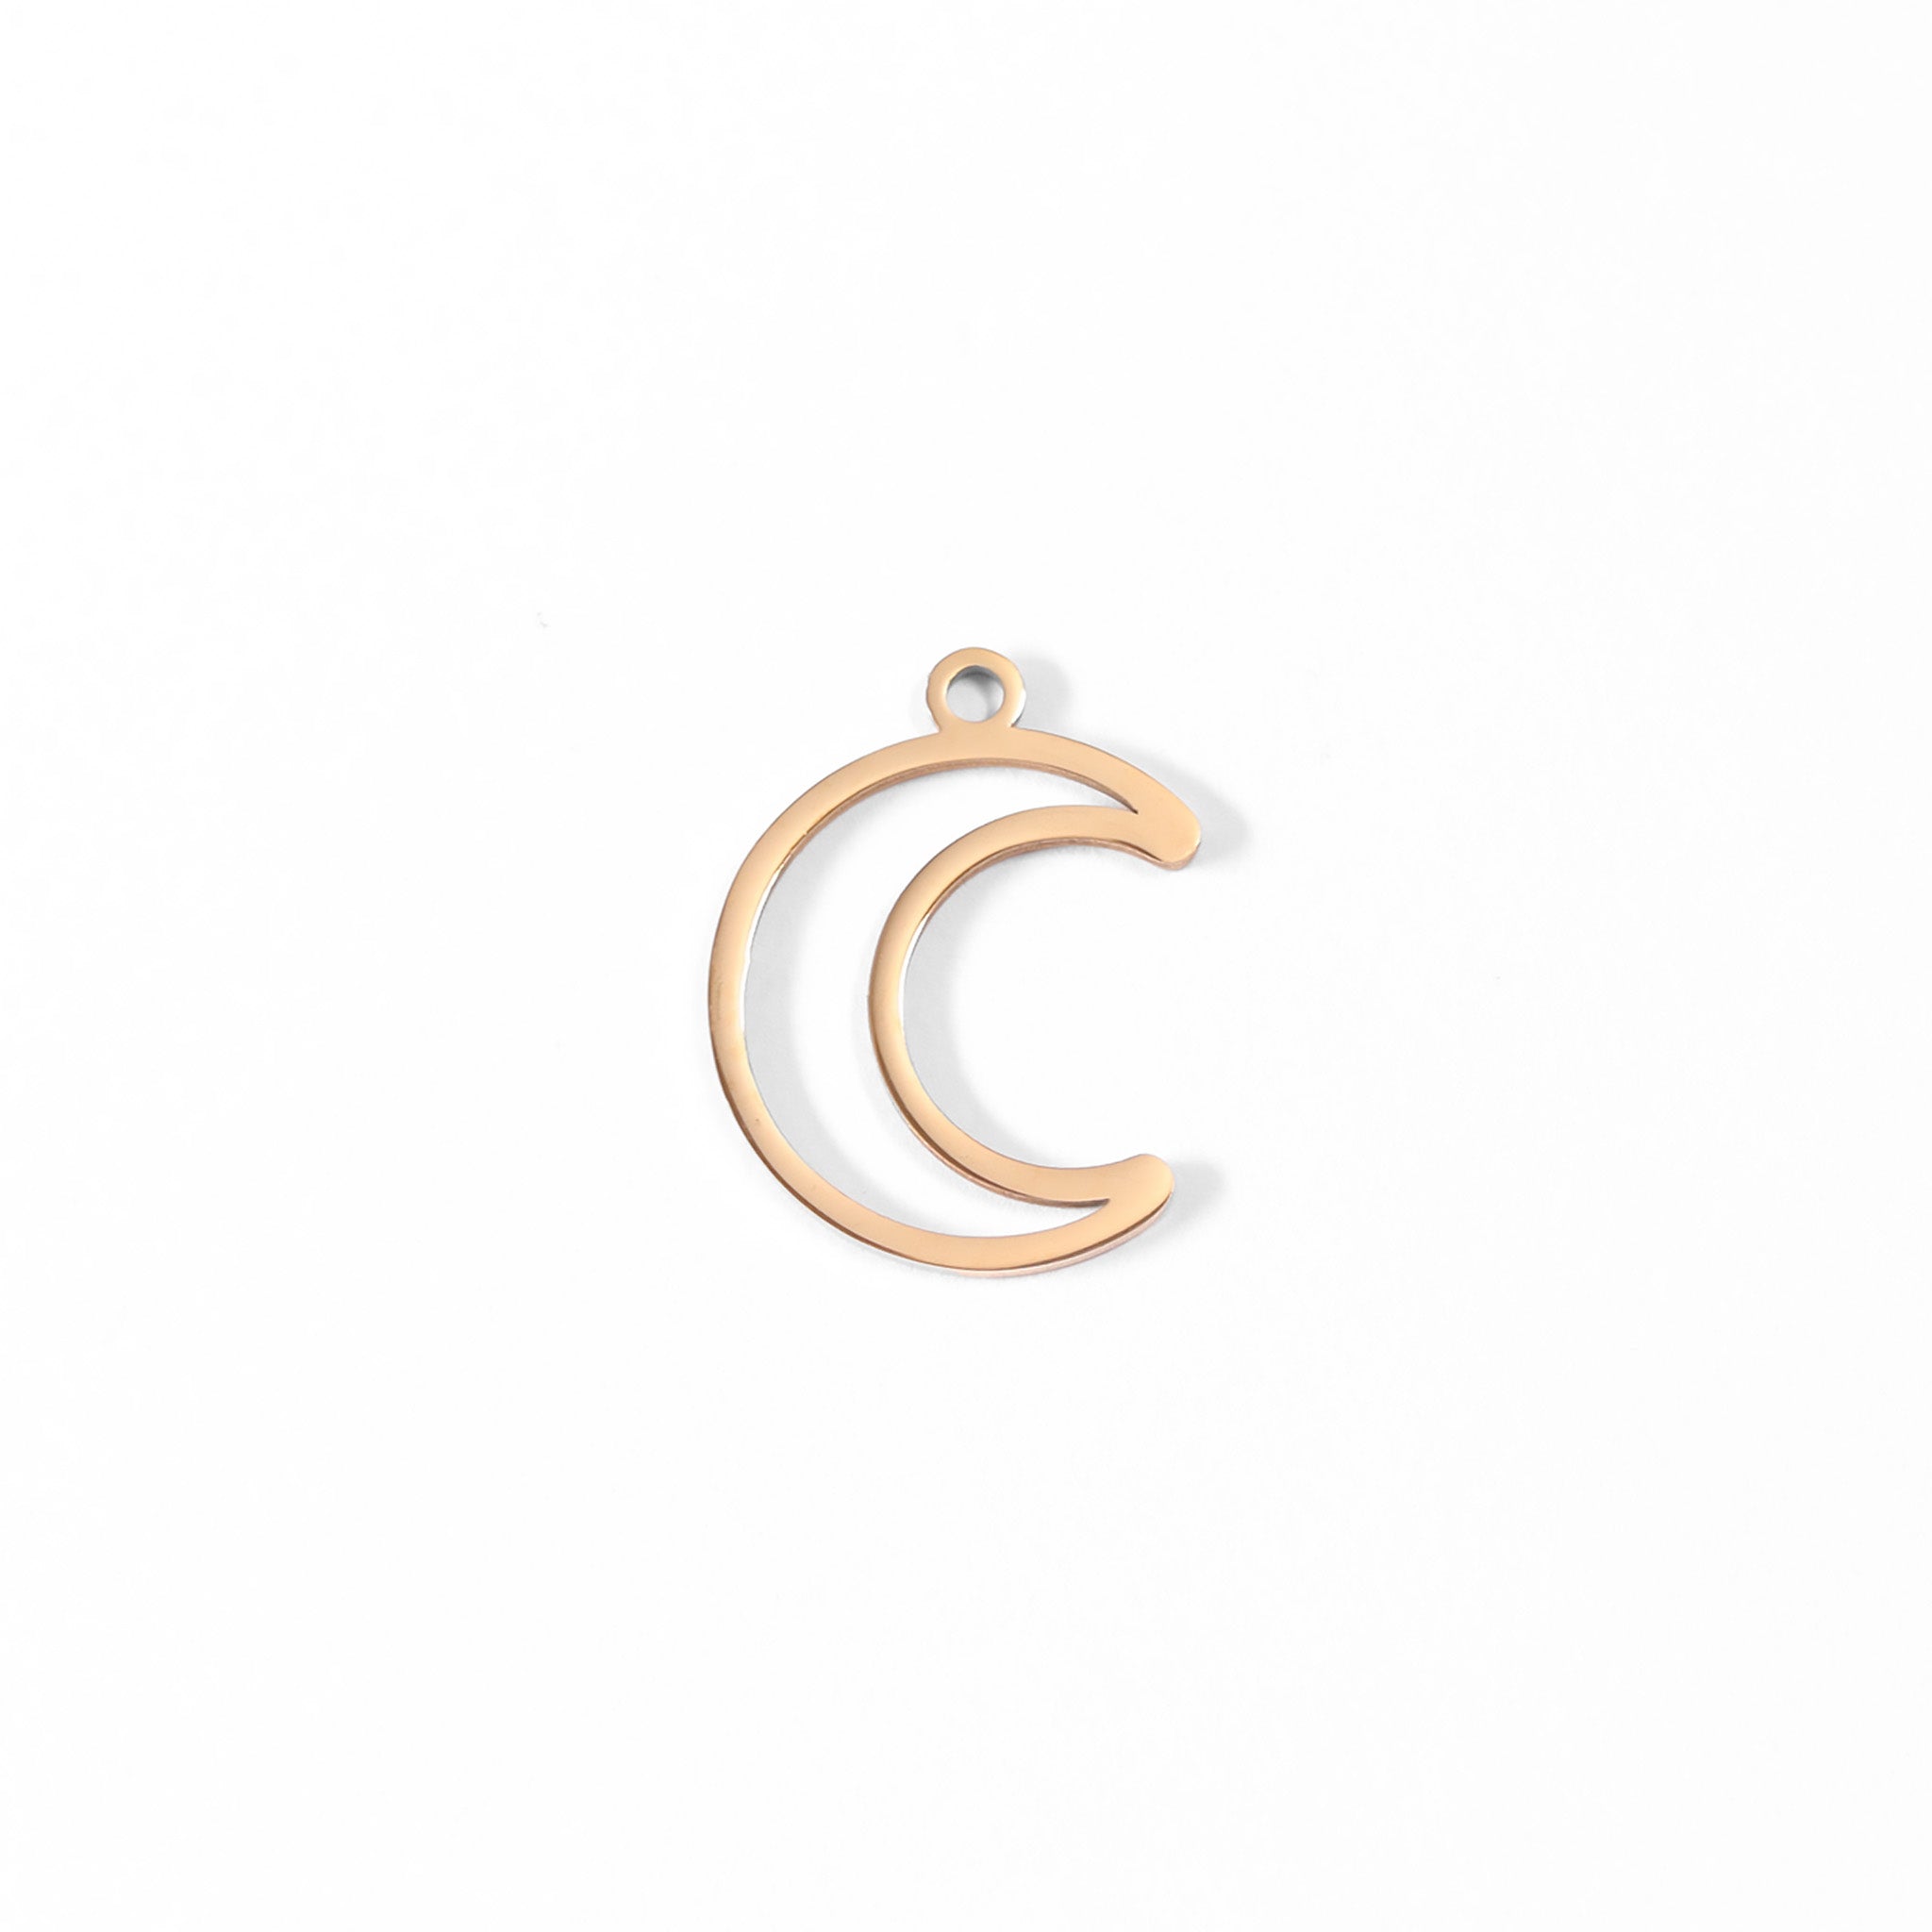 18K Gold PVD Stainless Steel Crescent Moon Charm / PDL0043